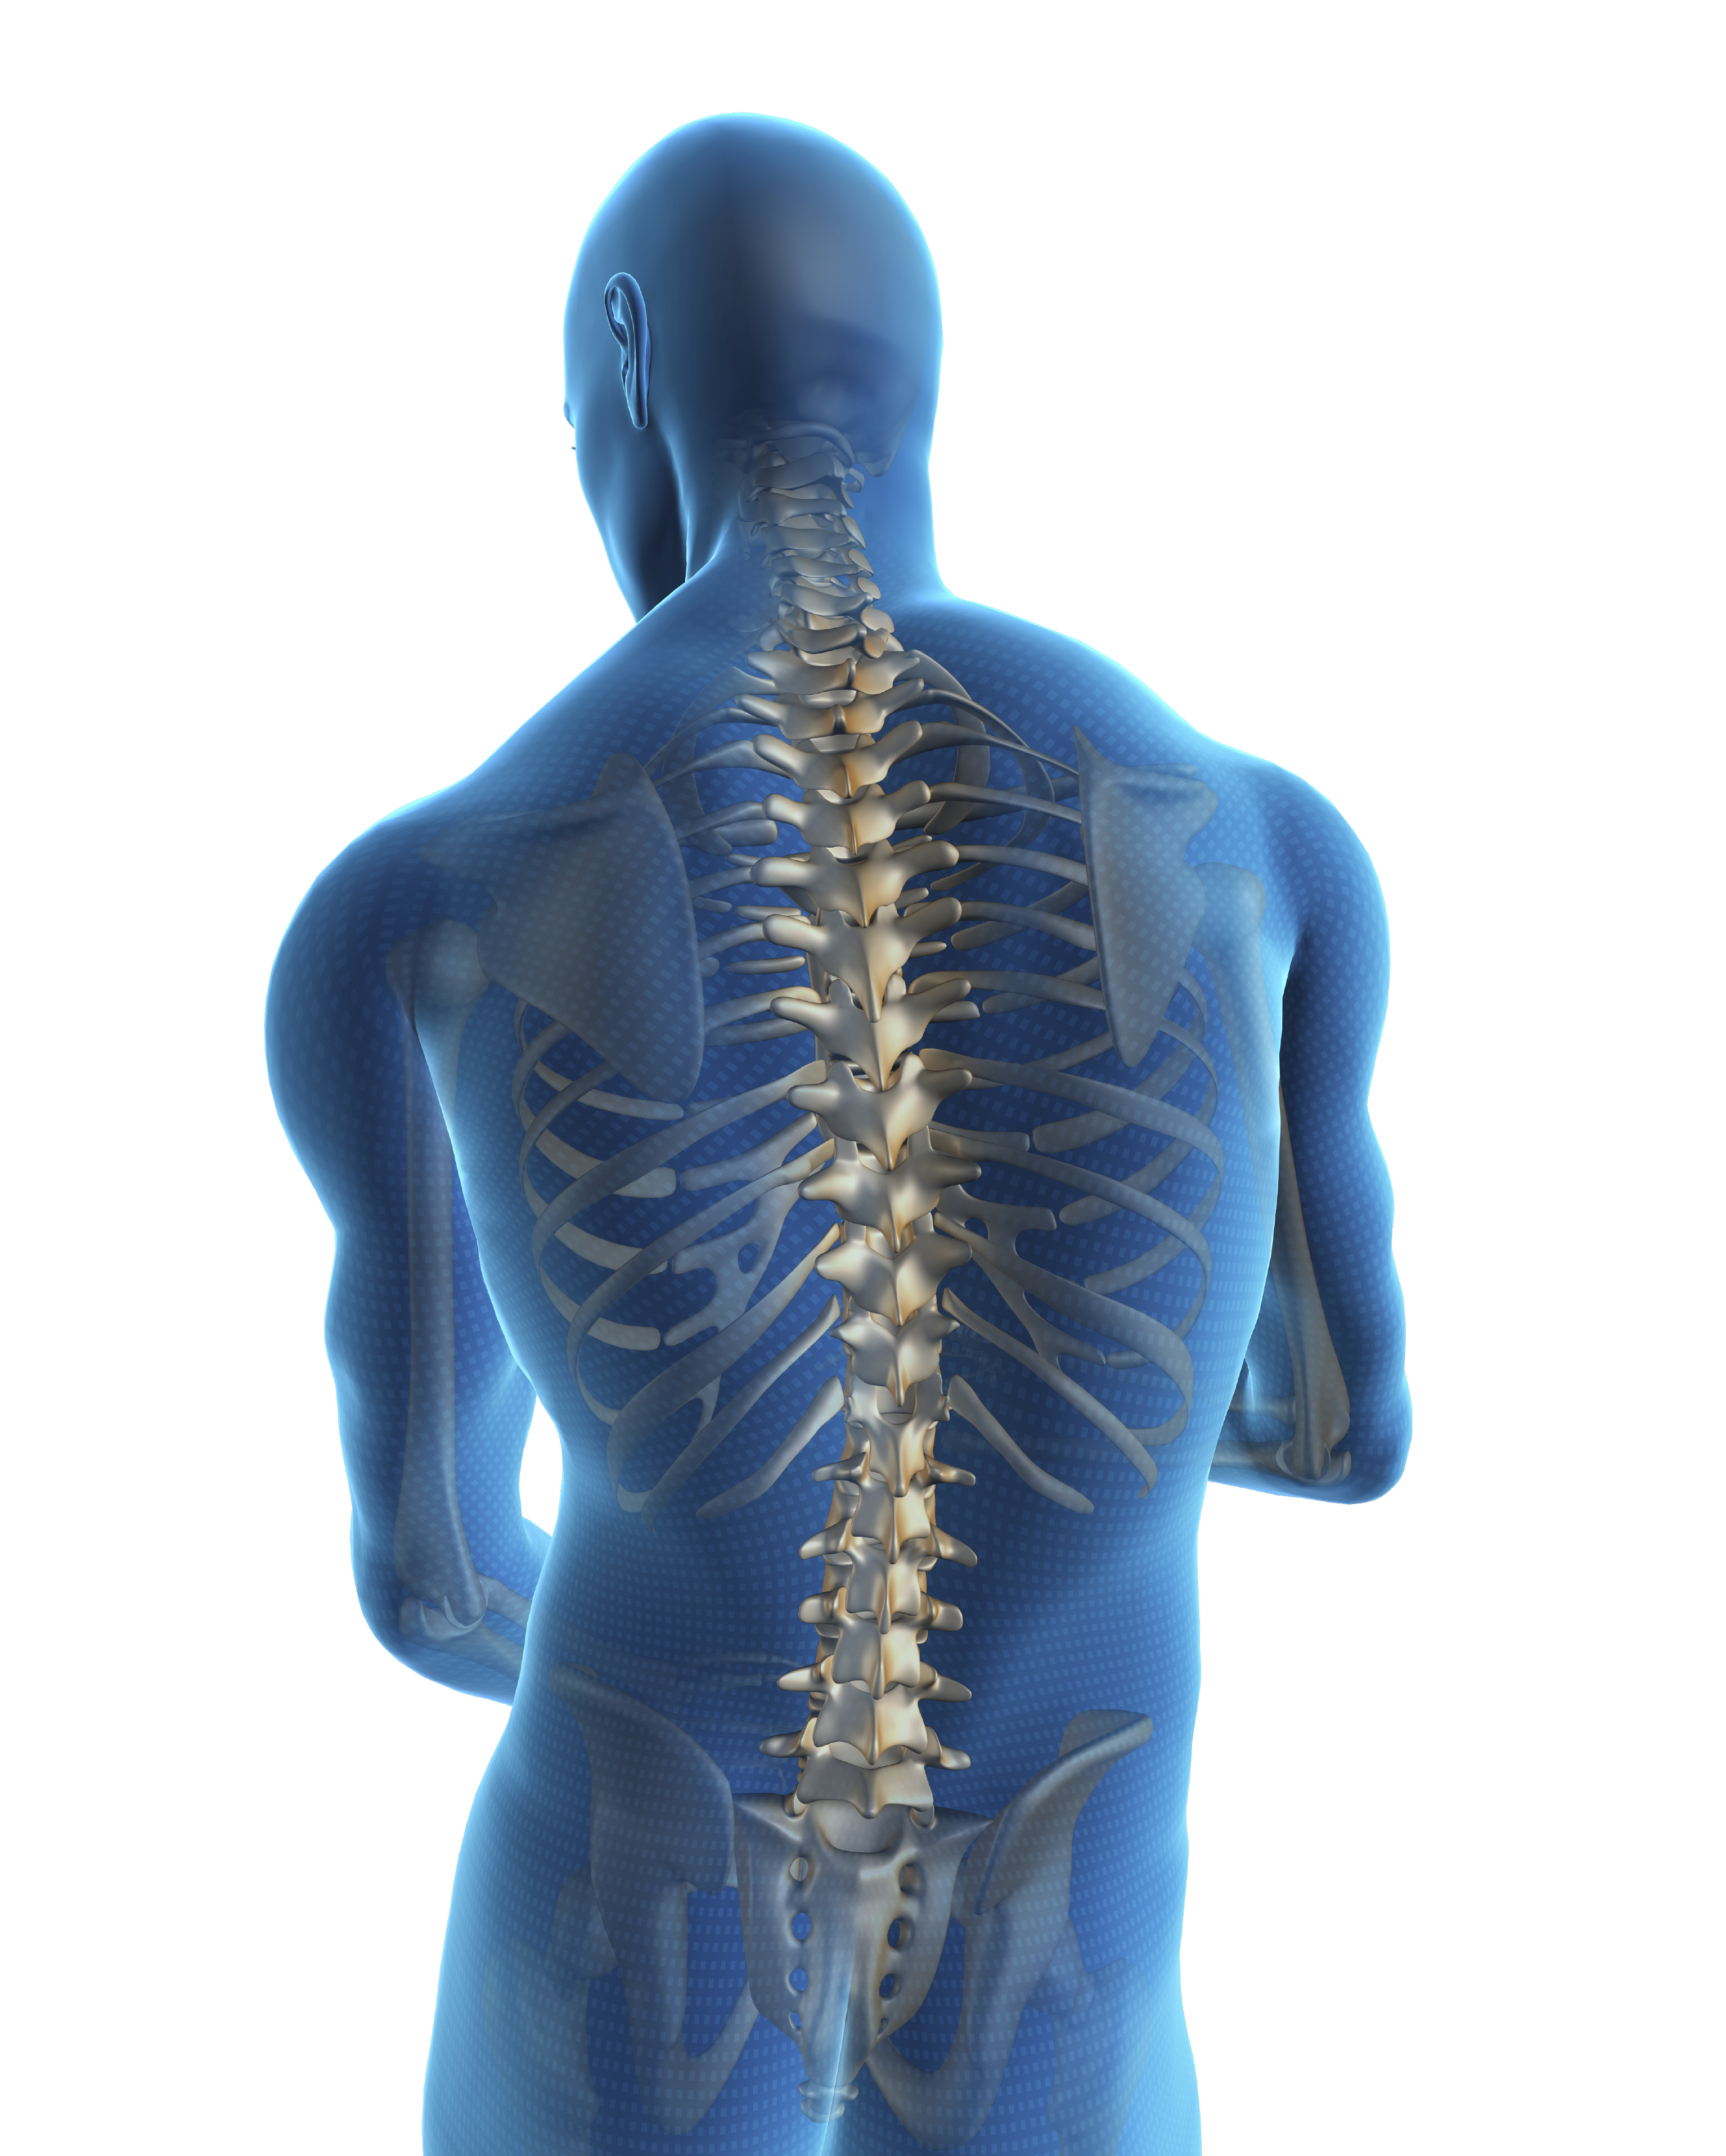 Back And Spine Backgrounds Wallpapers Human Back And Spine Design Jpg